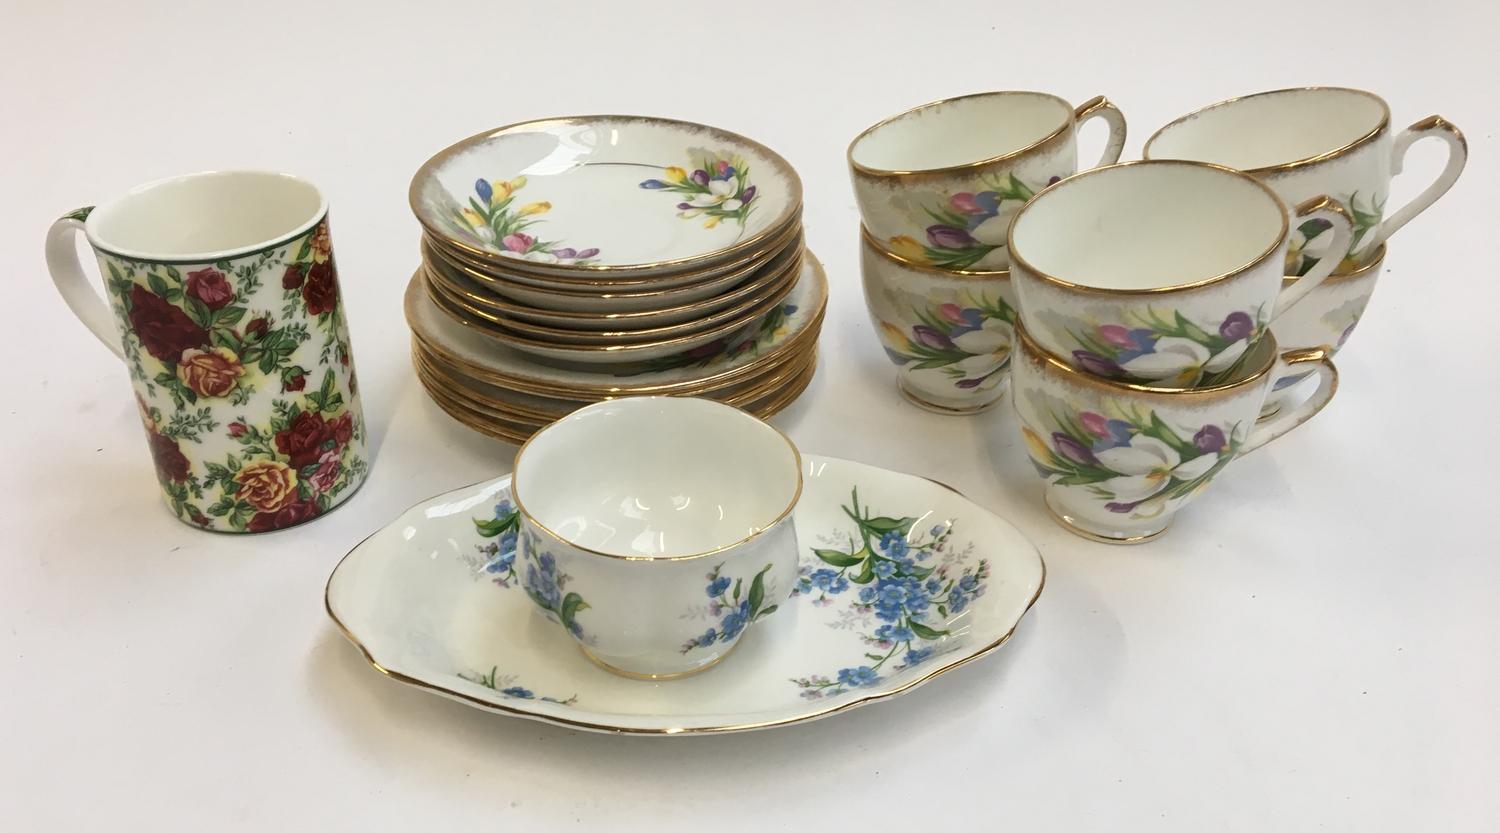 An Imperial Fine Bone China part tea set, six cups, six saucers and six plates, together with a